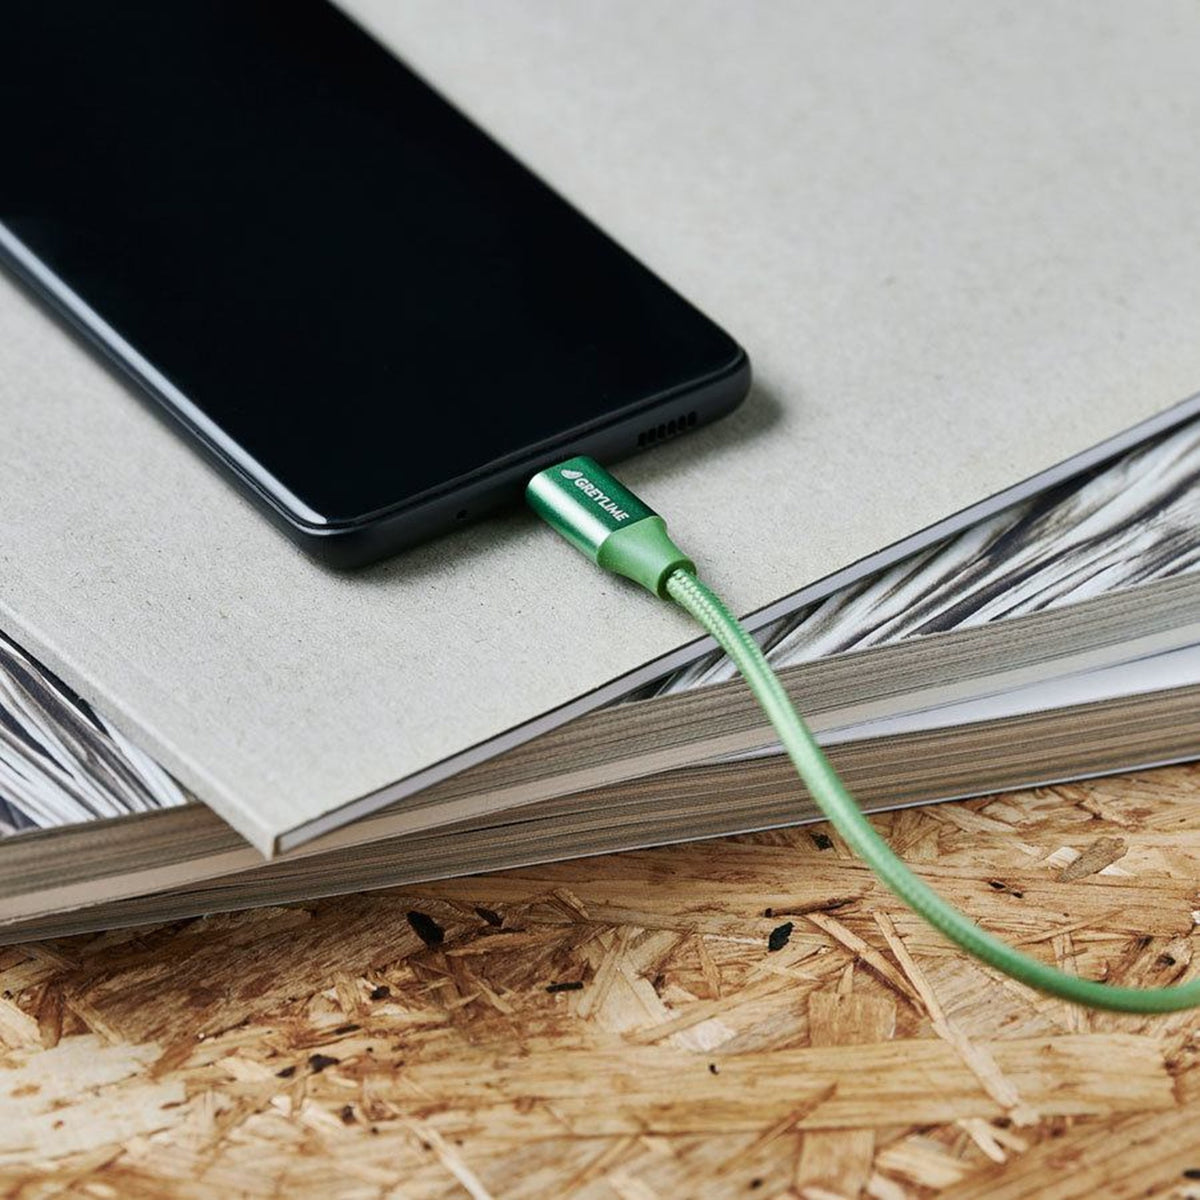 C21AC2M03-GreyLime-Braided-USB-A-to-USB-C-Cable-Groen-2-m_03.jpg